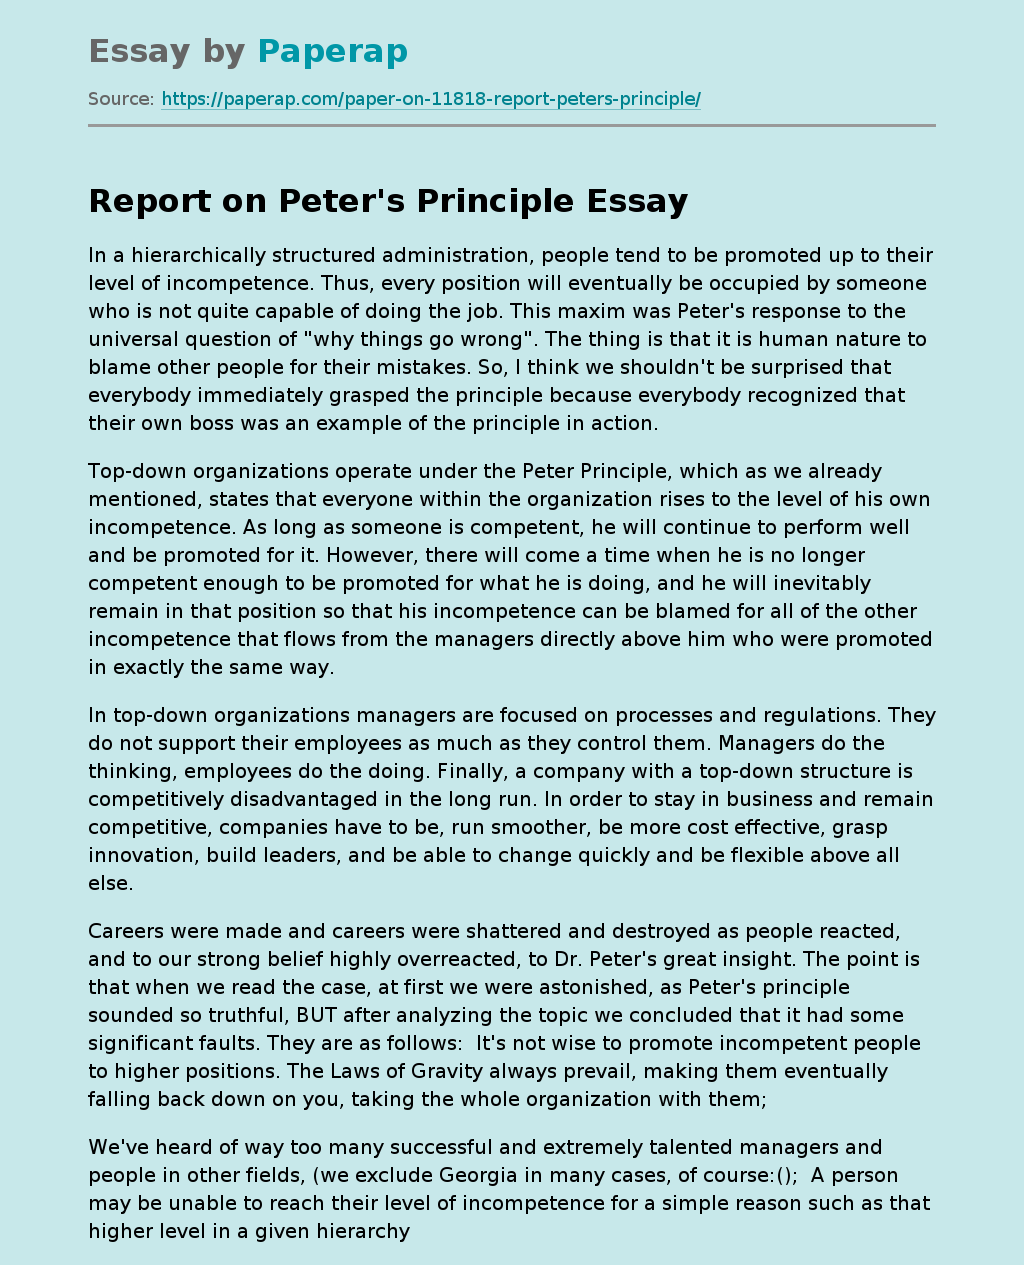 Report on Peter's Principle